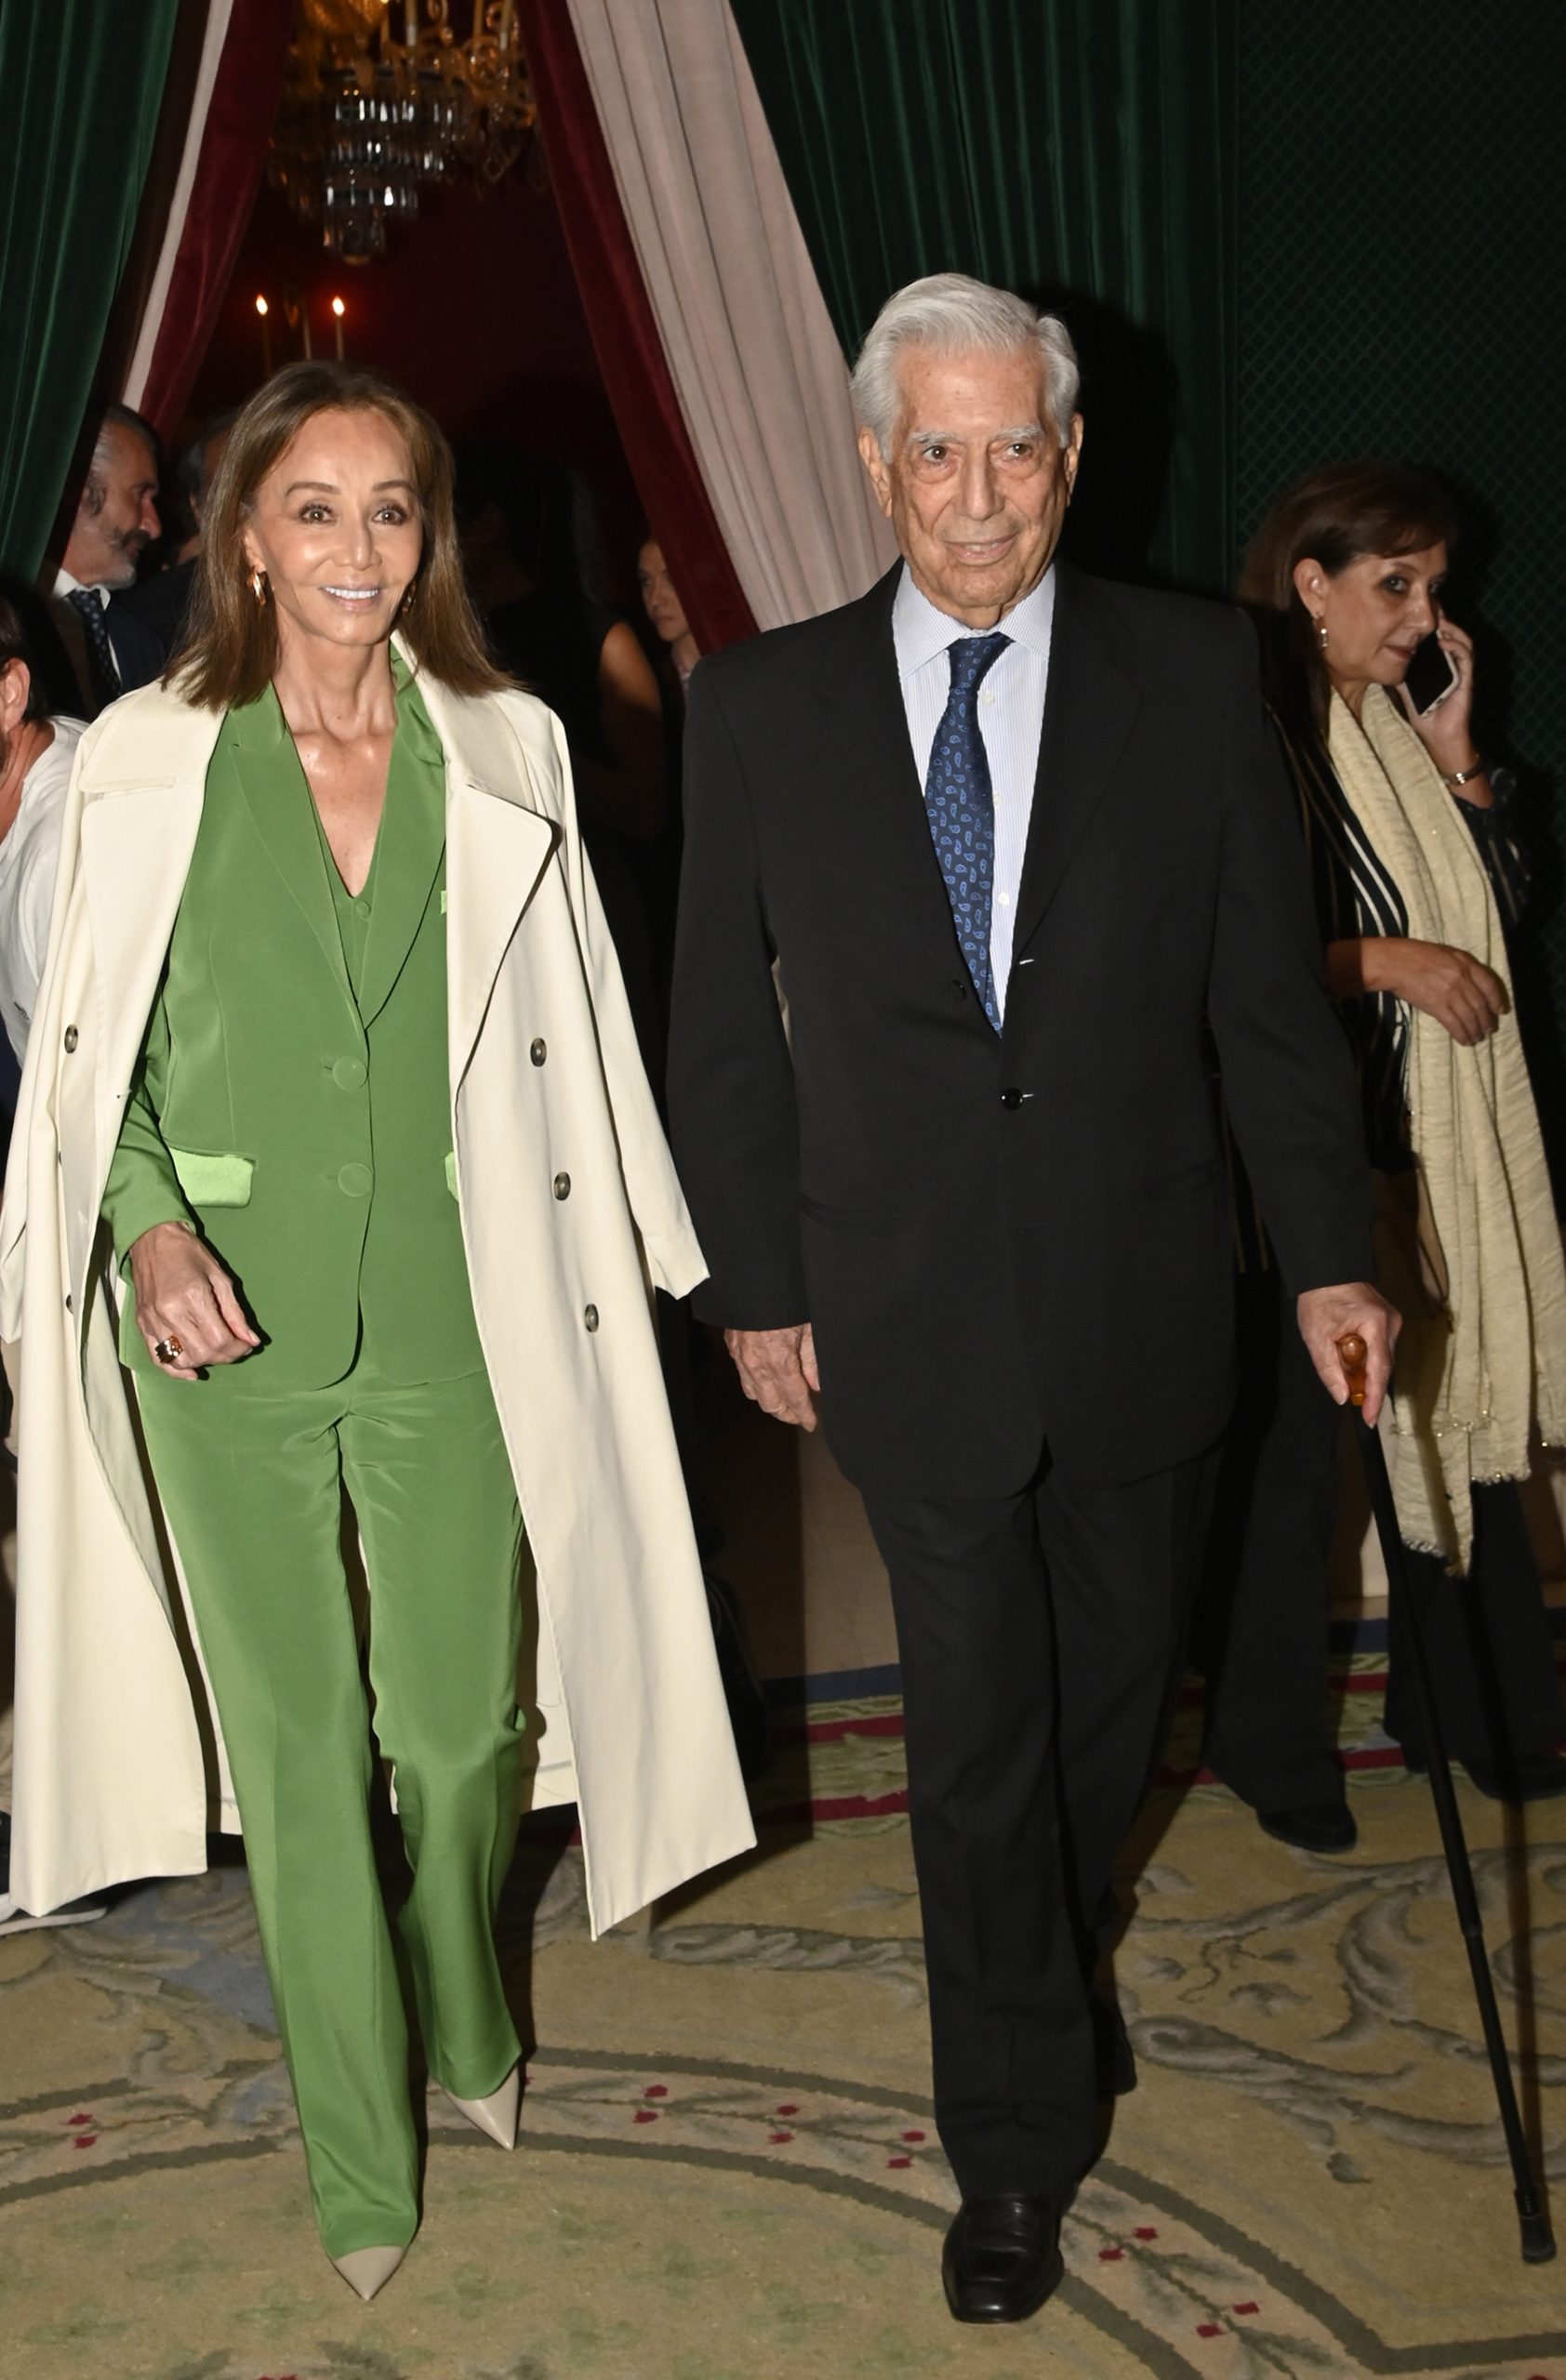 Isabel Preysler and Mario Vargas Llosa at the event / Gtres